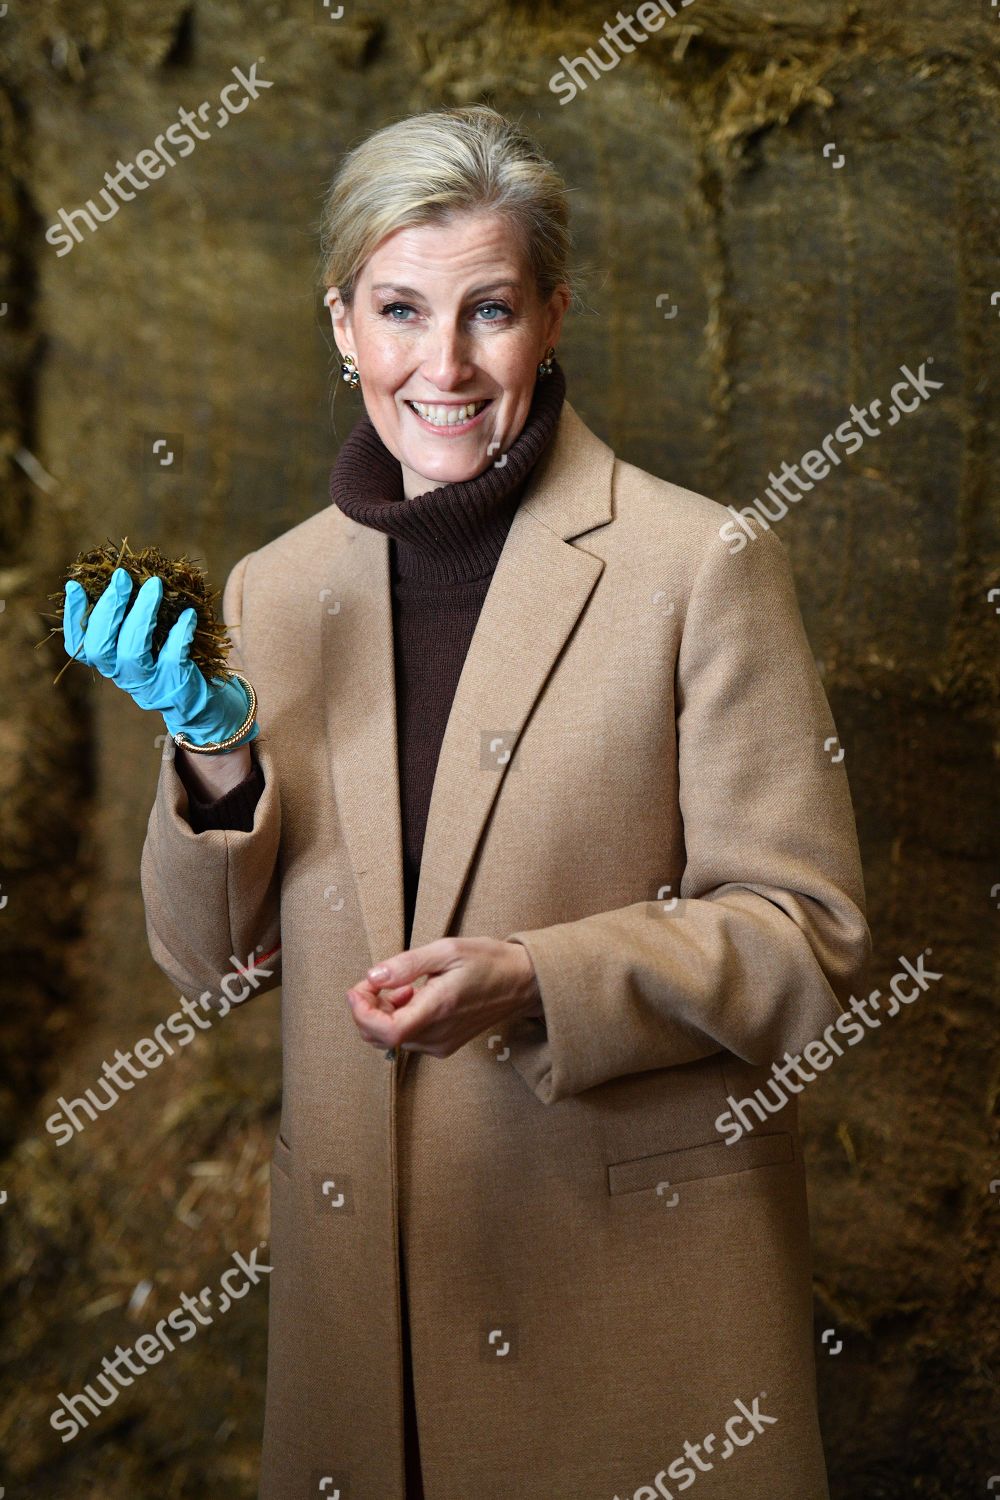 sophie-countess-of-wessex-visit-to-cumbria-shutterstock-editorial-10095439bt.jpg